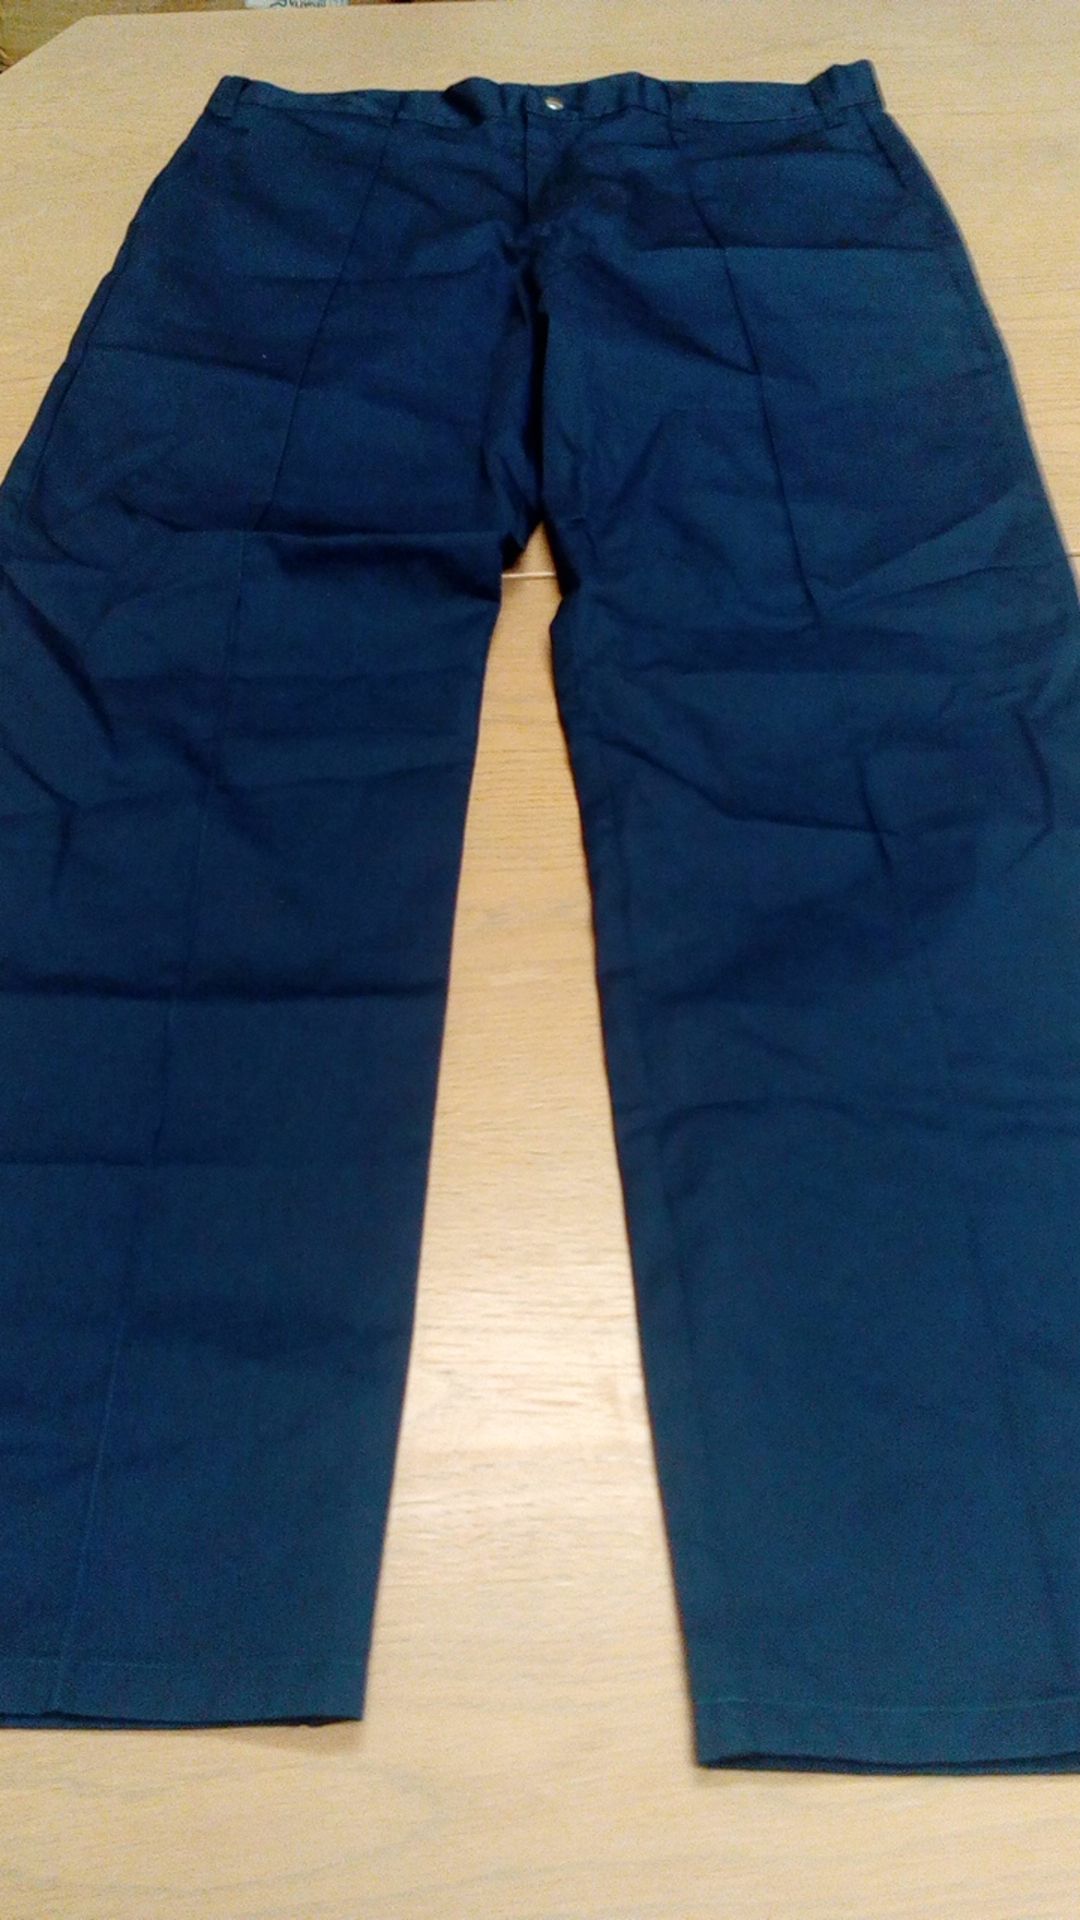 Alexandra workwear size 38 inch navy mens work trousers Alexandra workwear new and unused, these